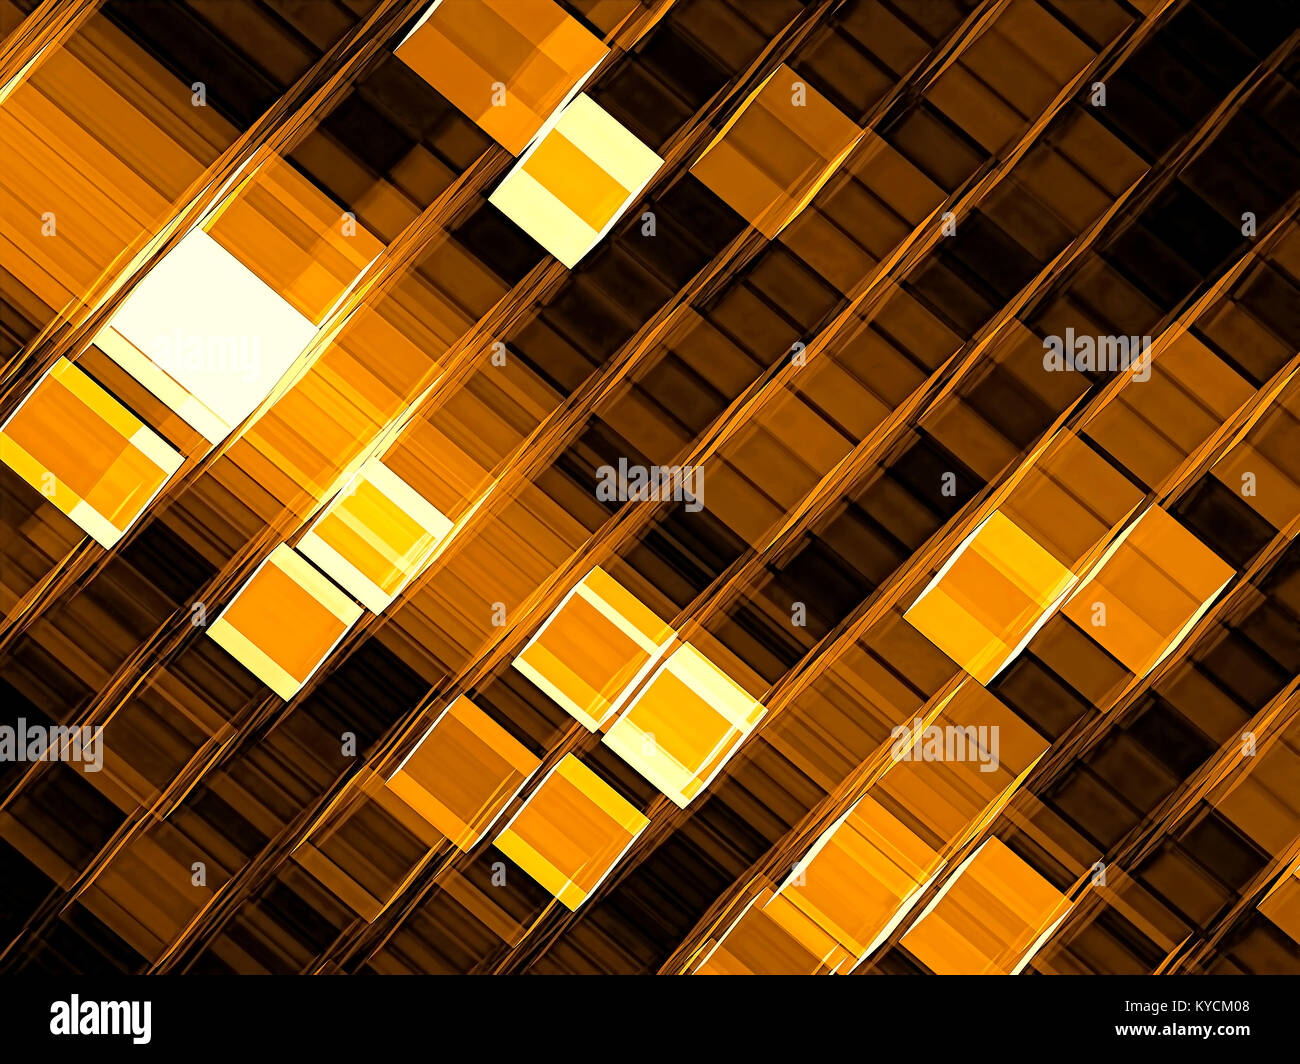 Golden tech style background - abstract computer-generated image. Fractal art - grid with glowing cells or chaos cubes. Information technology, scienc Stock Photo